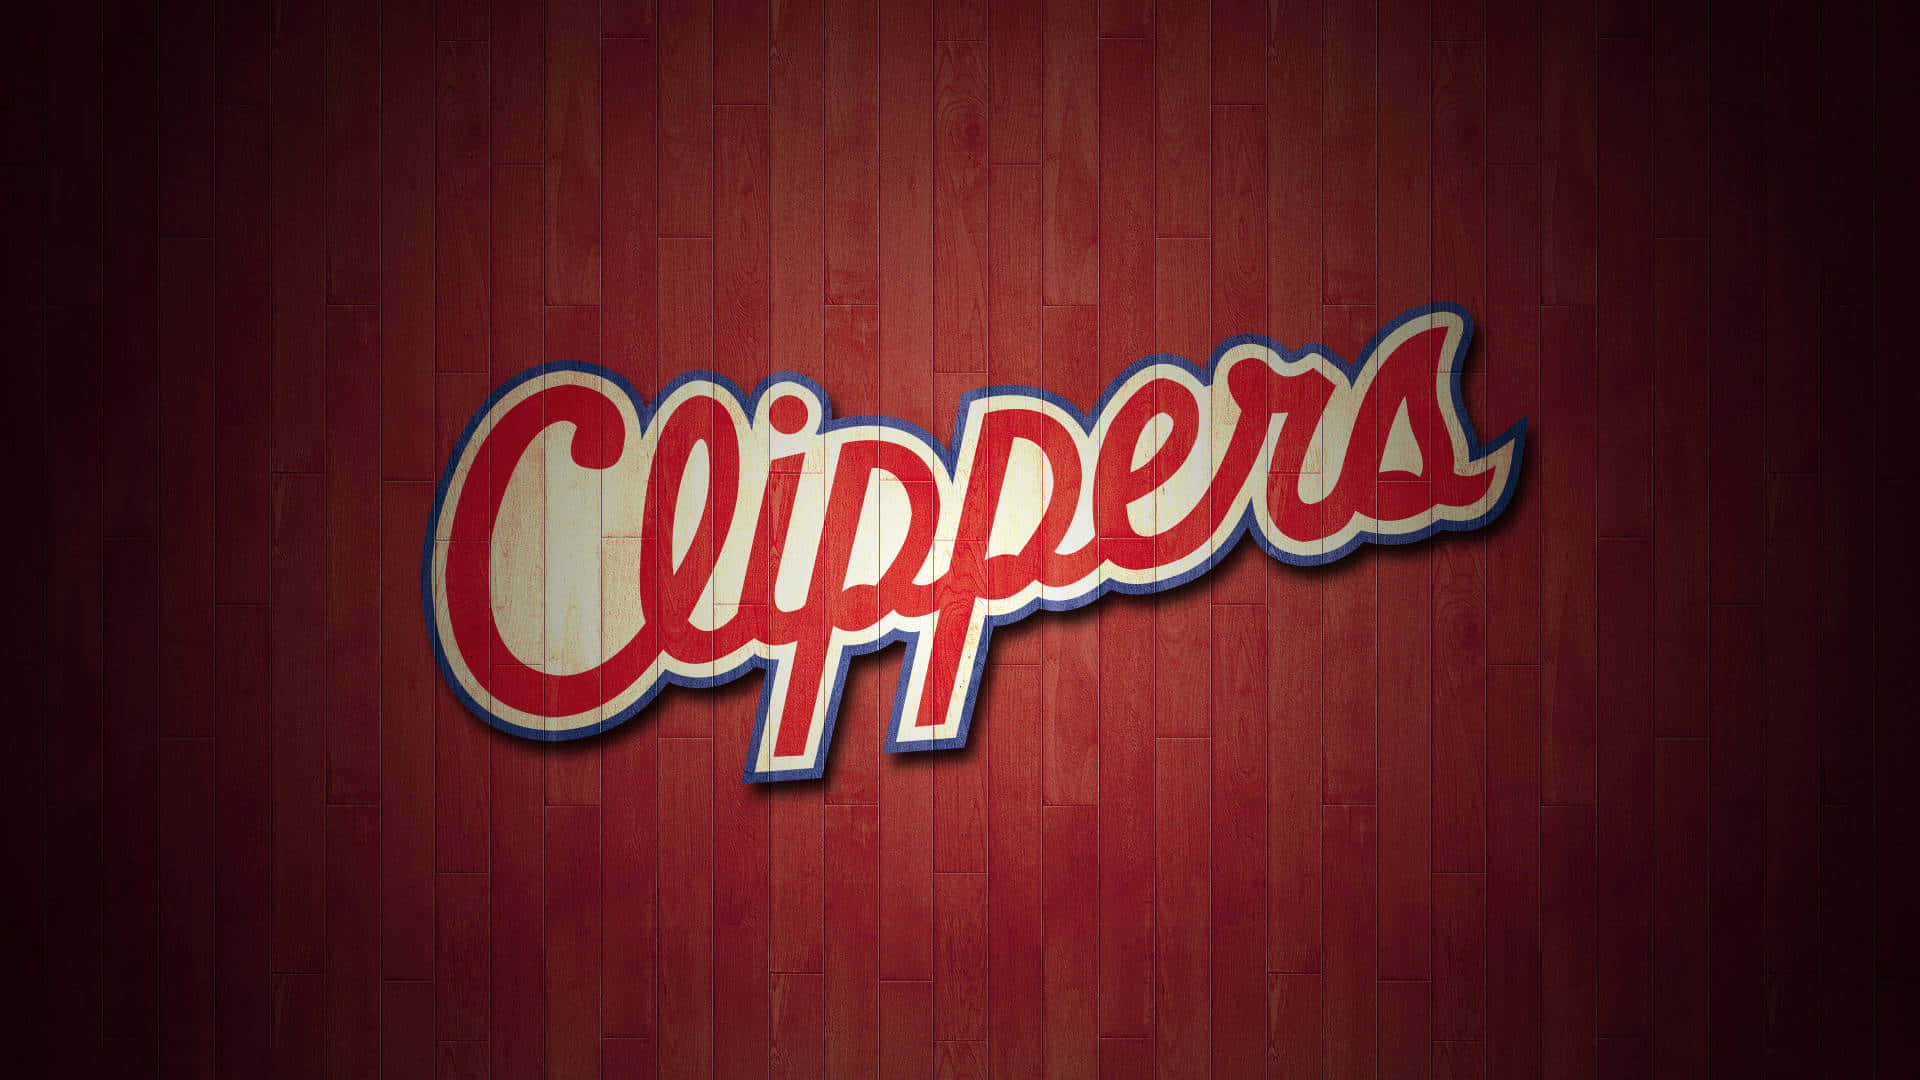 Red Basketball Team LA Clippers Typography Wallpaper